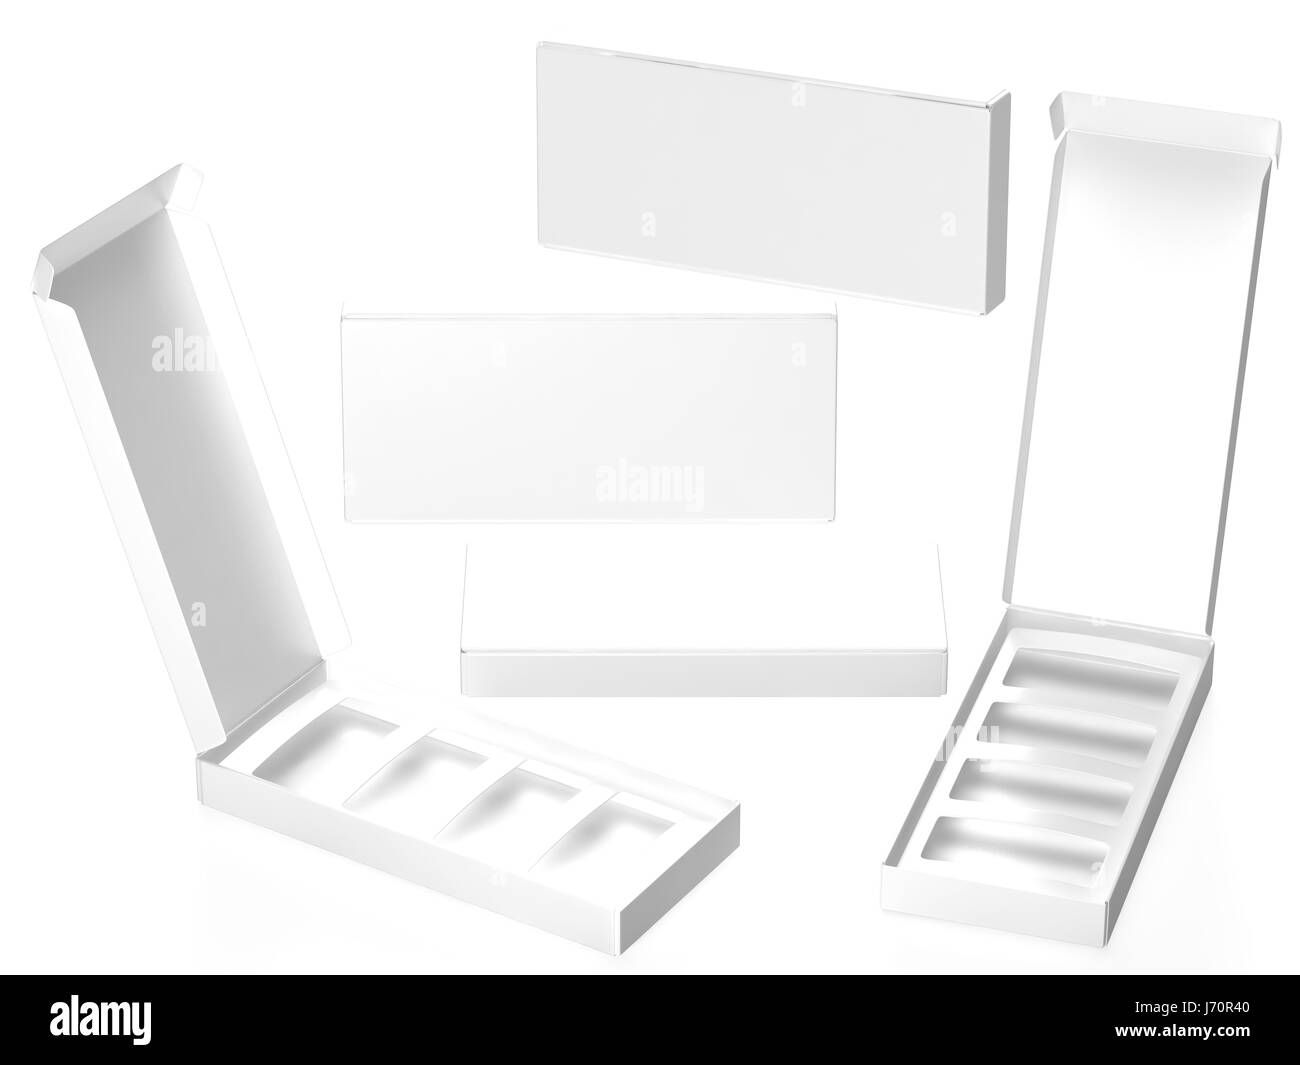 White paper carton box with divider, clipping path included. Template package for variety product like food, gift, cosmetic or health care . ready for Stock Photo